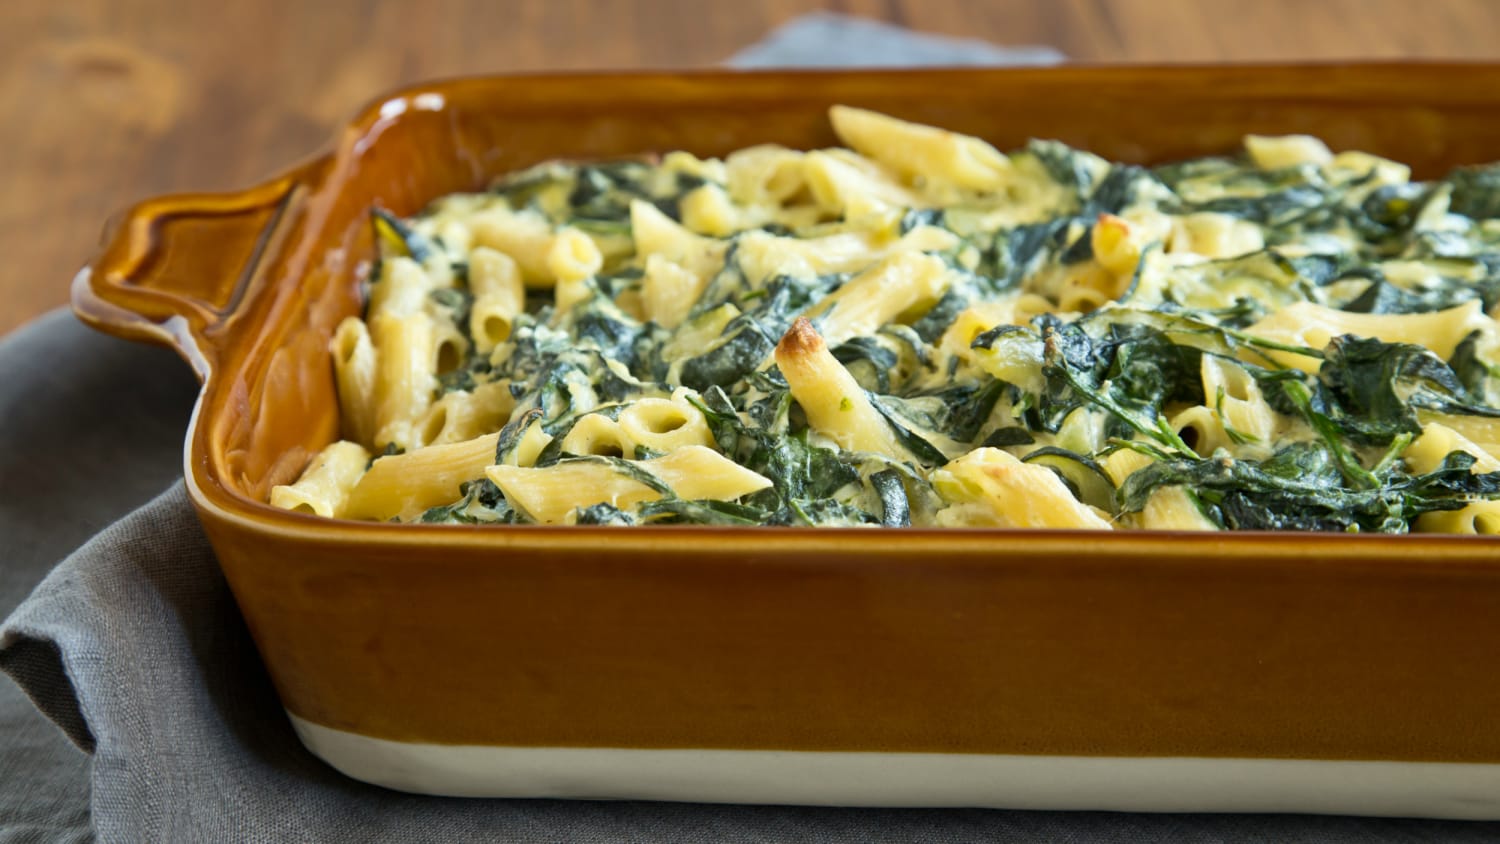 Celebrate spring with a light and bright vegetable pasta casserole